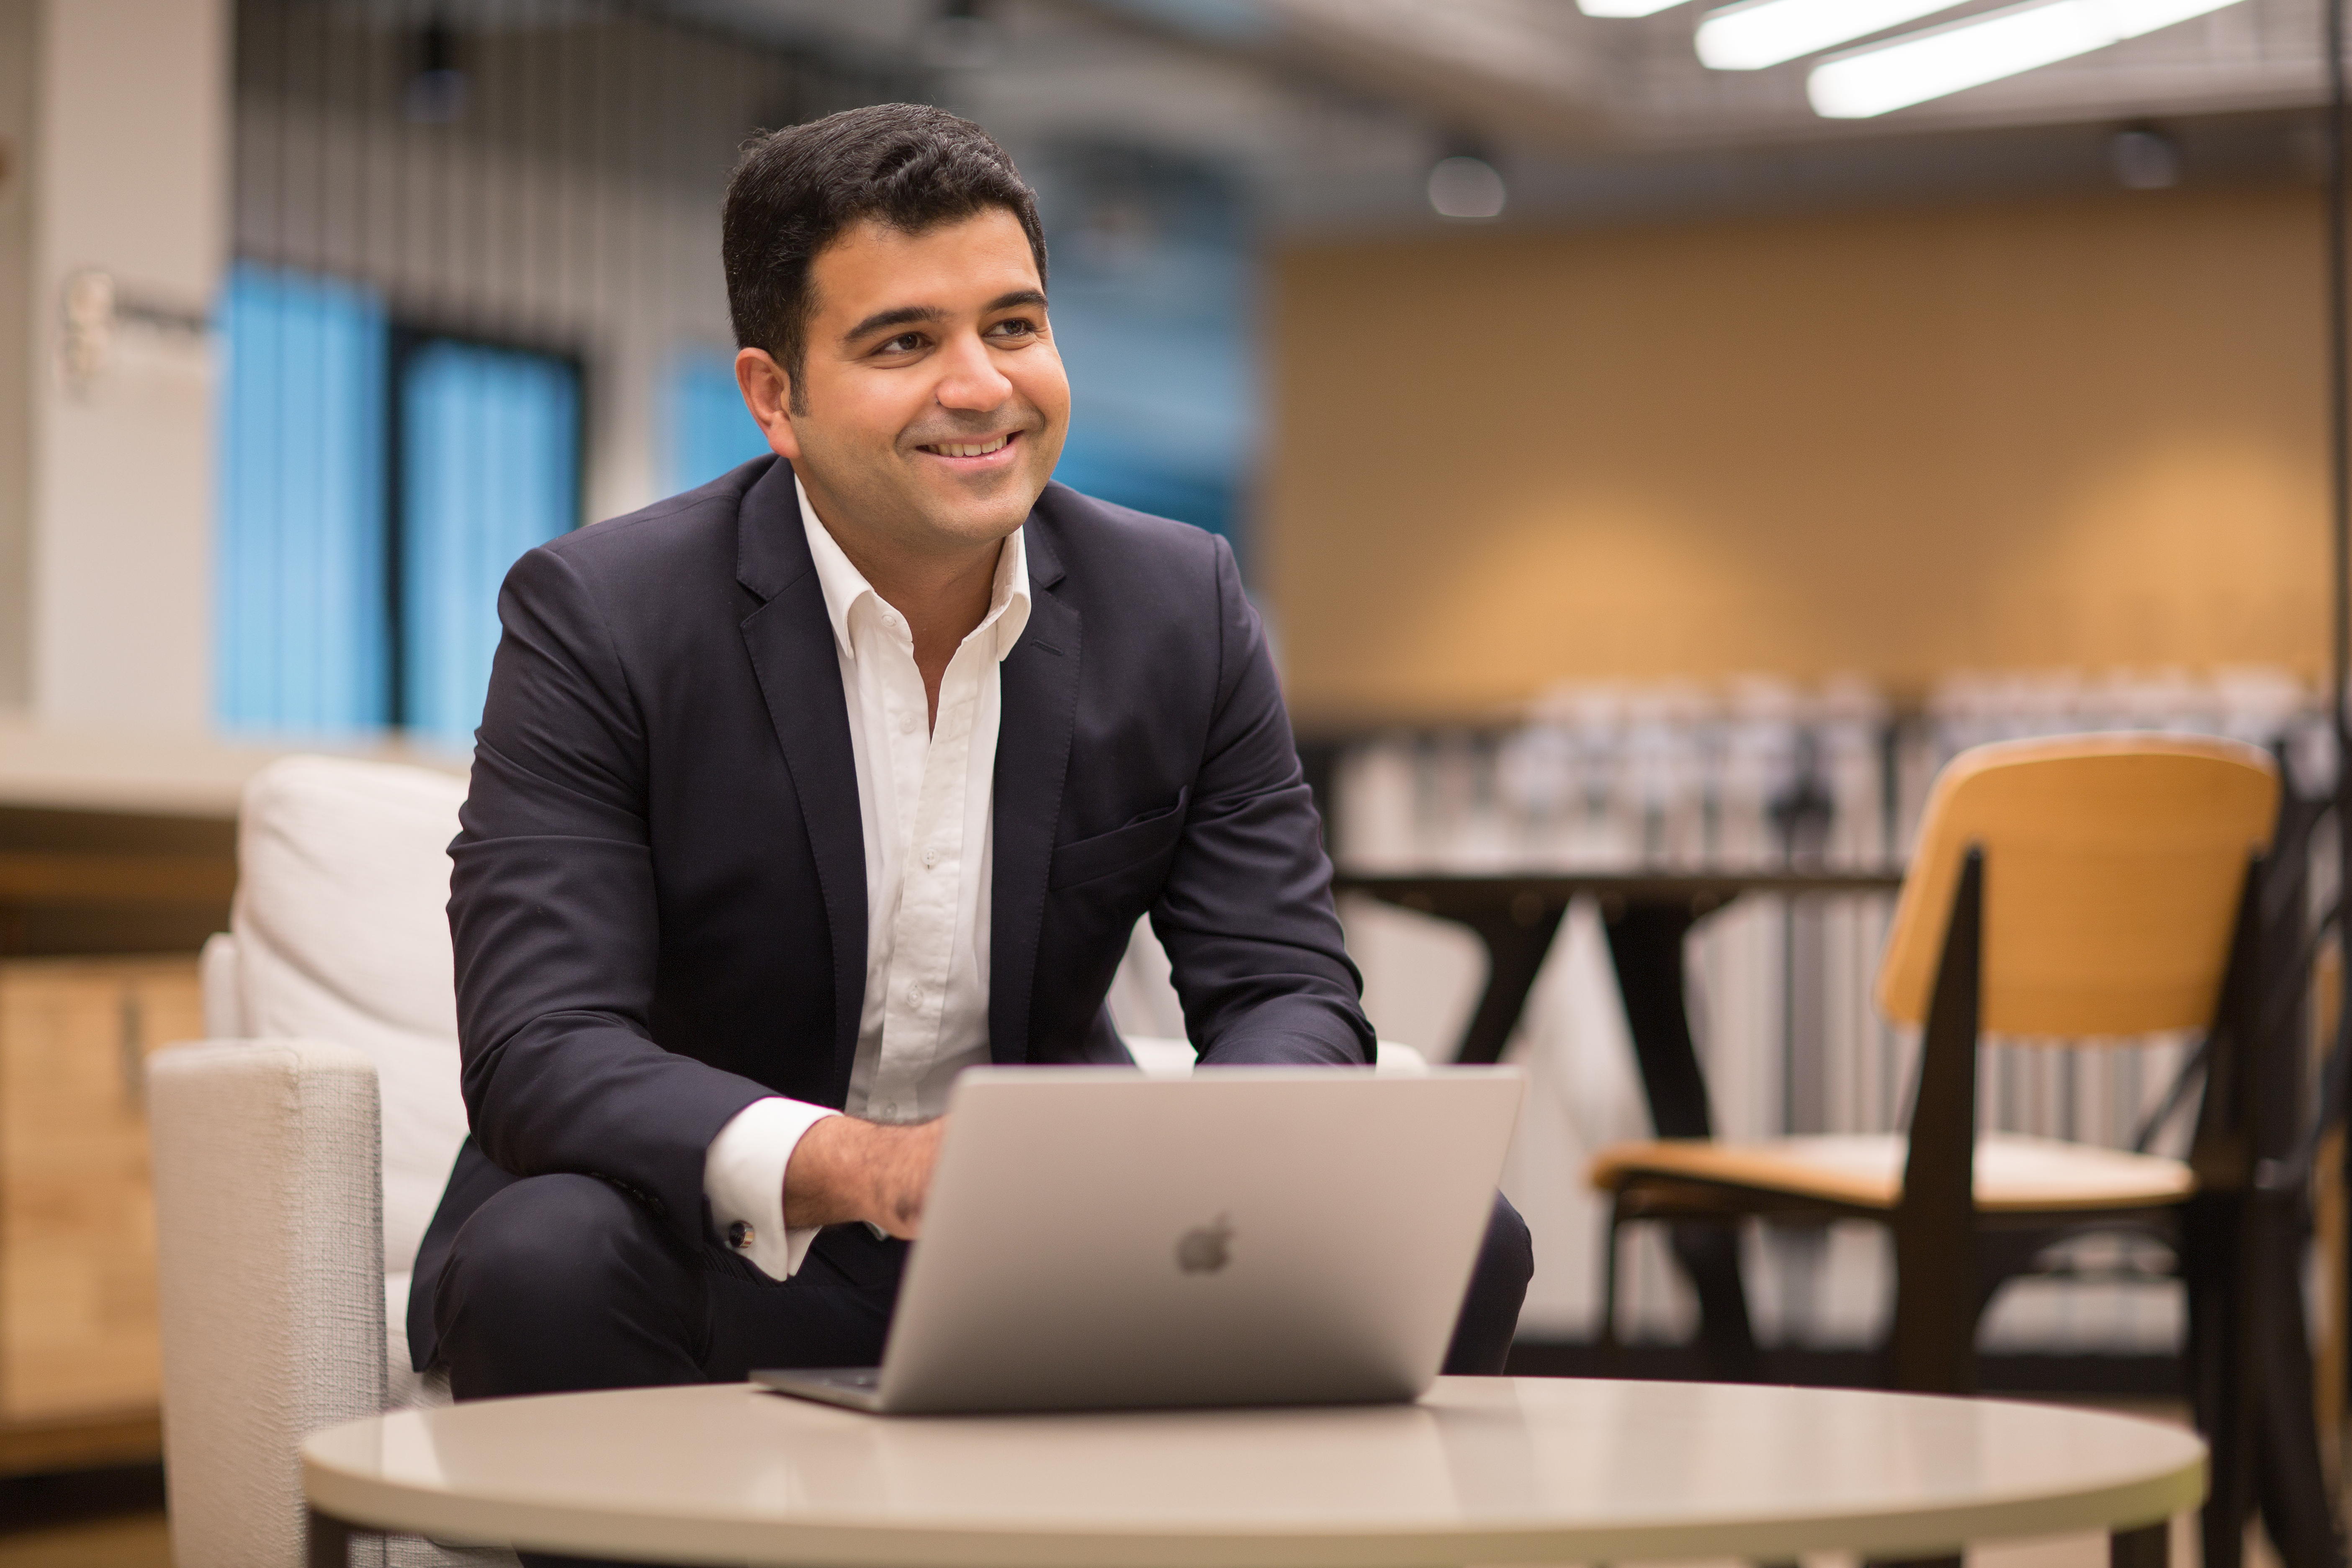 Dhruv Arora, the founder and CEO of Singapore-based investment platform Syfe